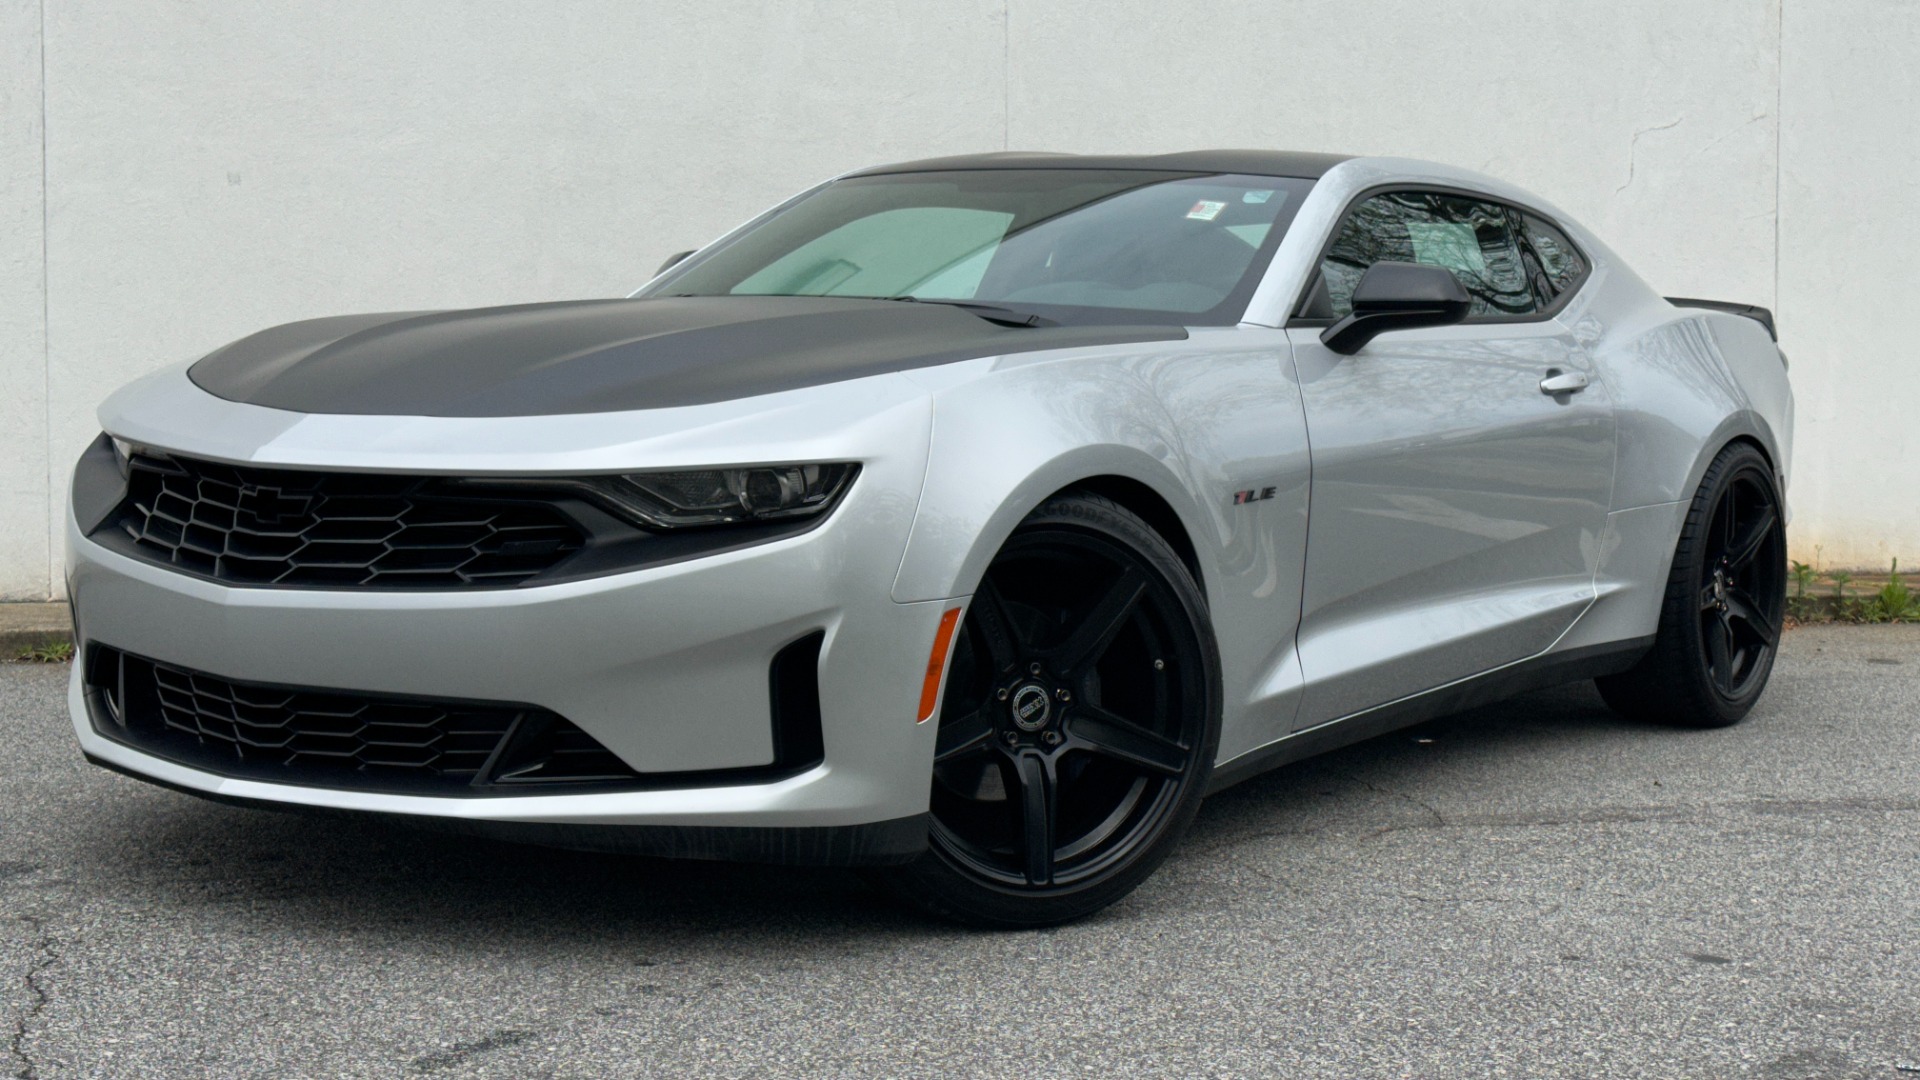 Used 2019 Chevrolet Camaro 2LT / 6SPD MANUAL / RECARO SEATS / UPGRADED WHEELS for sale $29,900 at Formula Imports in Charlotte NC 28227 1